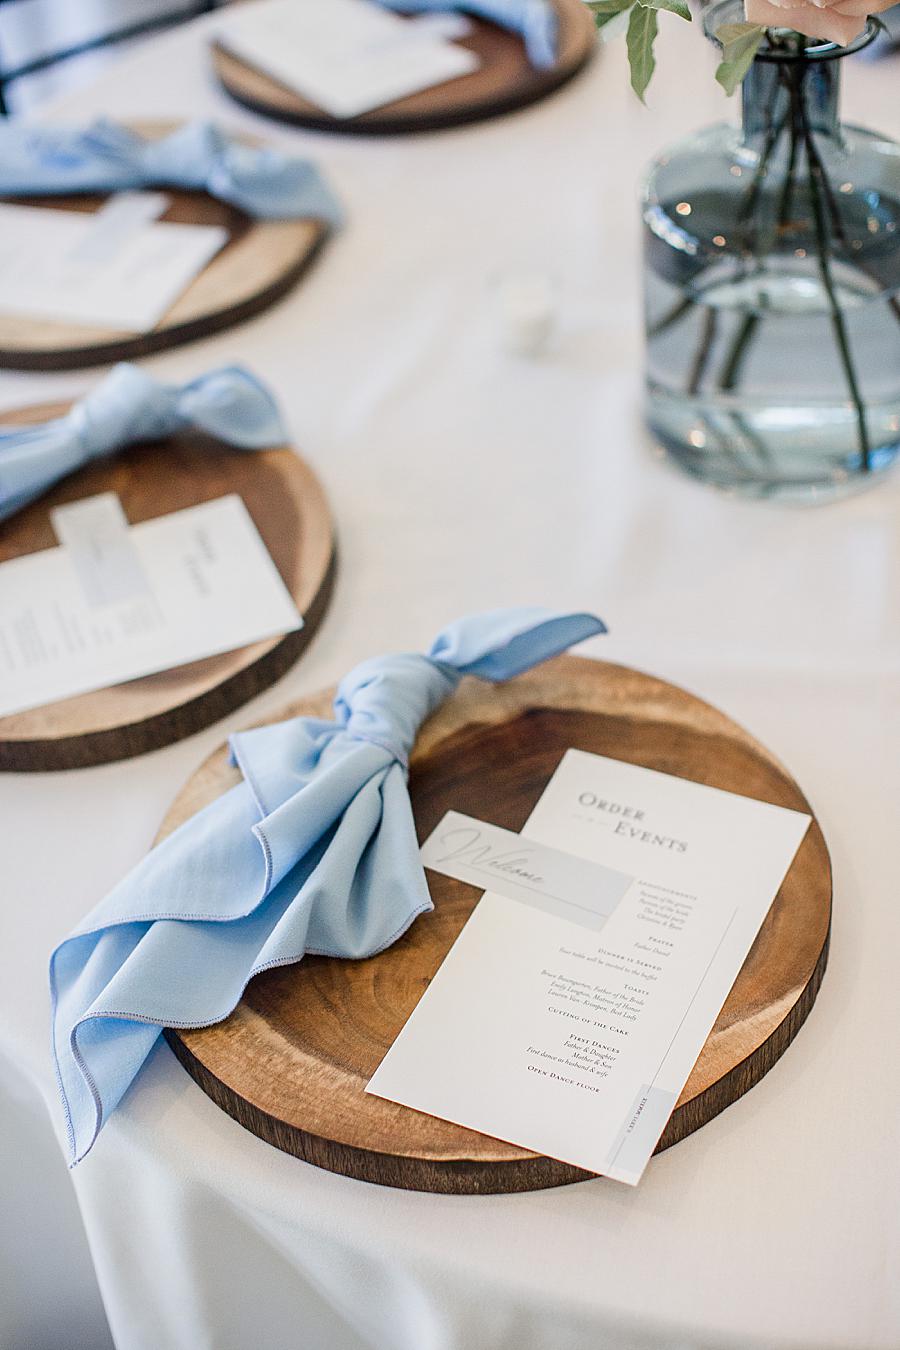 Plate charger at this Marblegate Farm Wedding by Knoxville Wedding Photographer, Amanda May Photos.